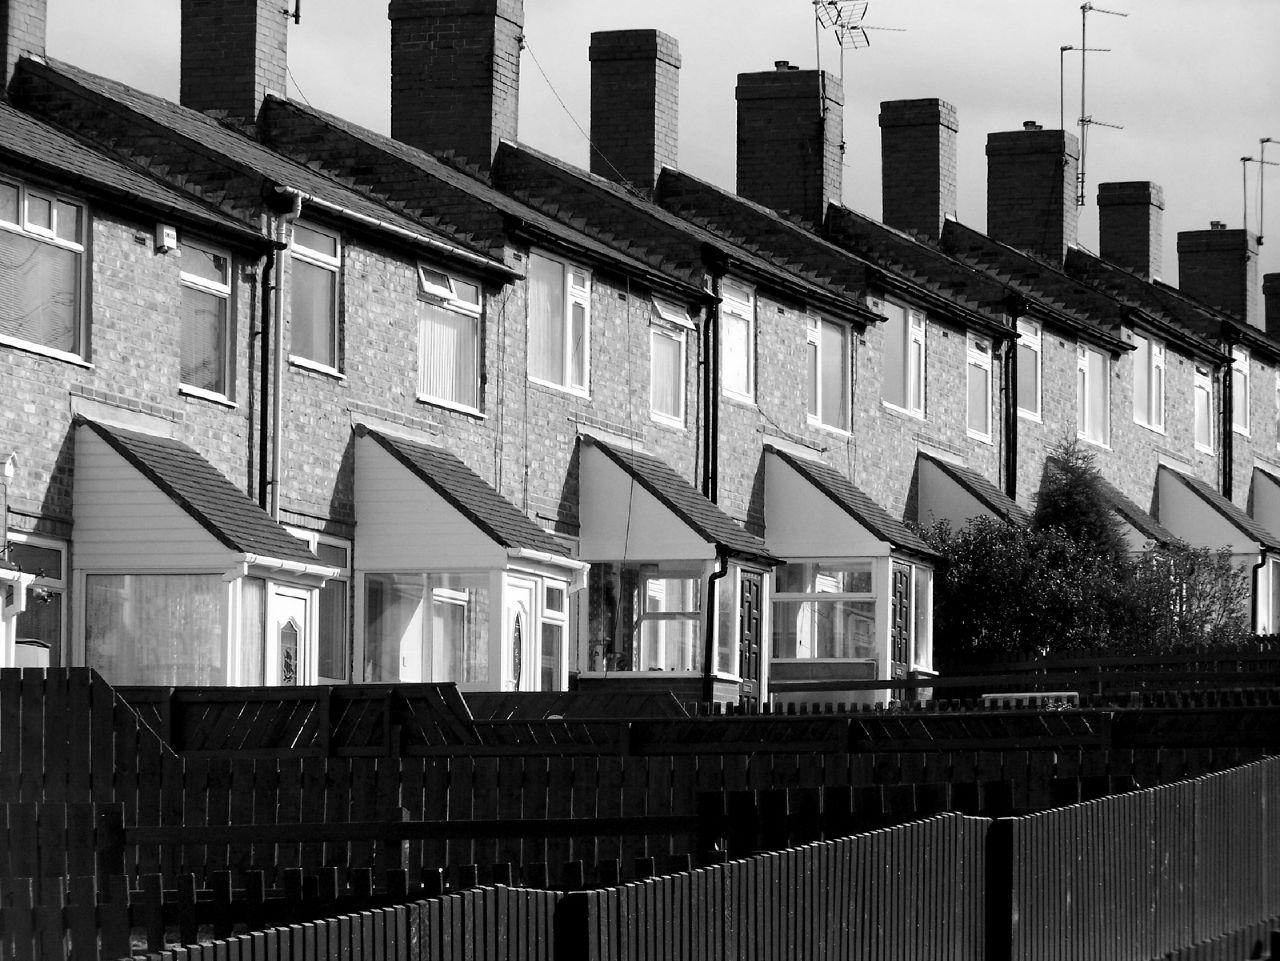 Right to rent comes into force today